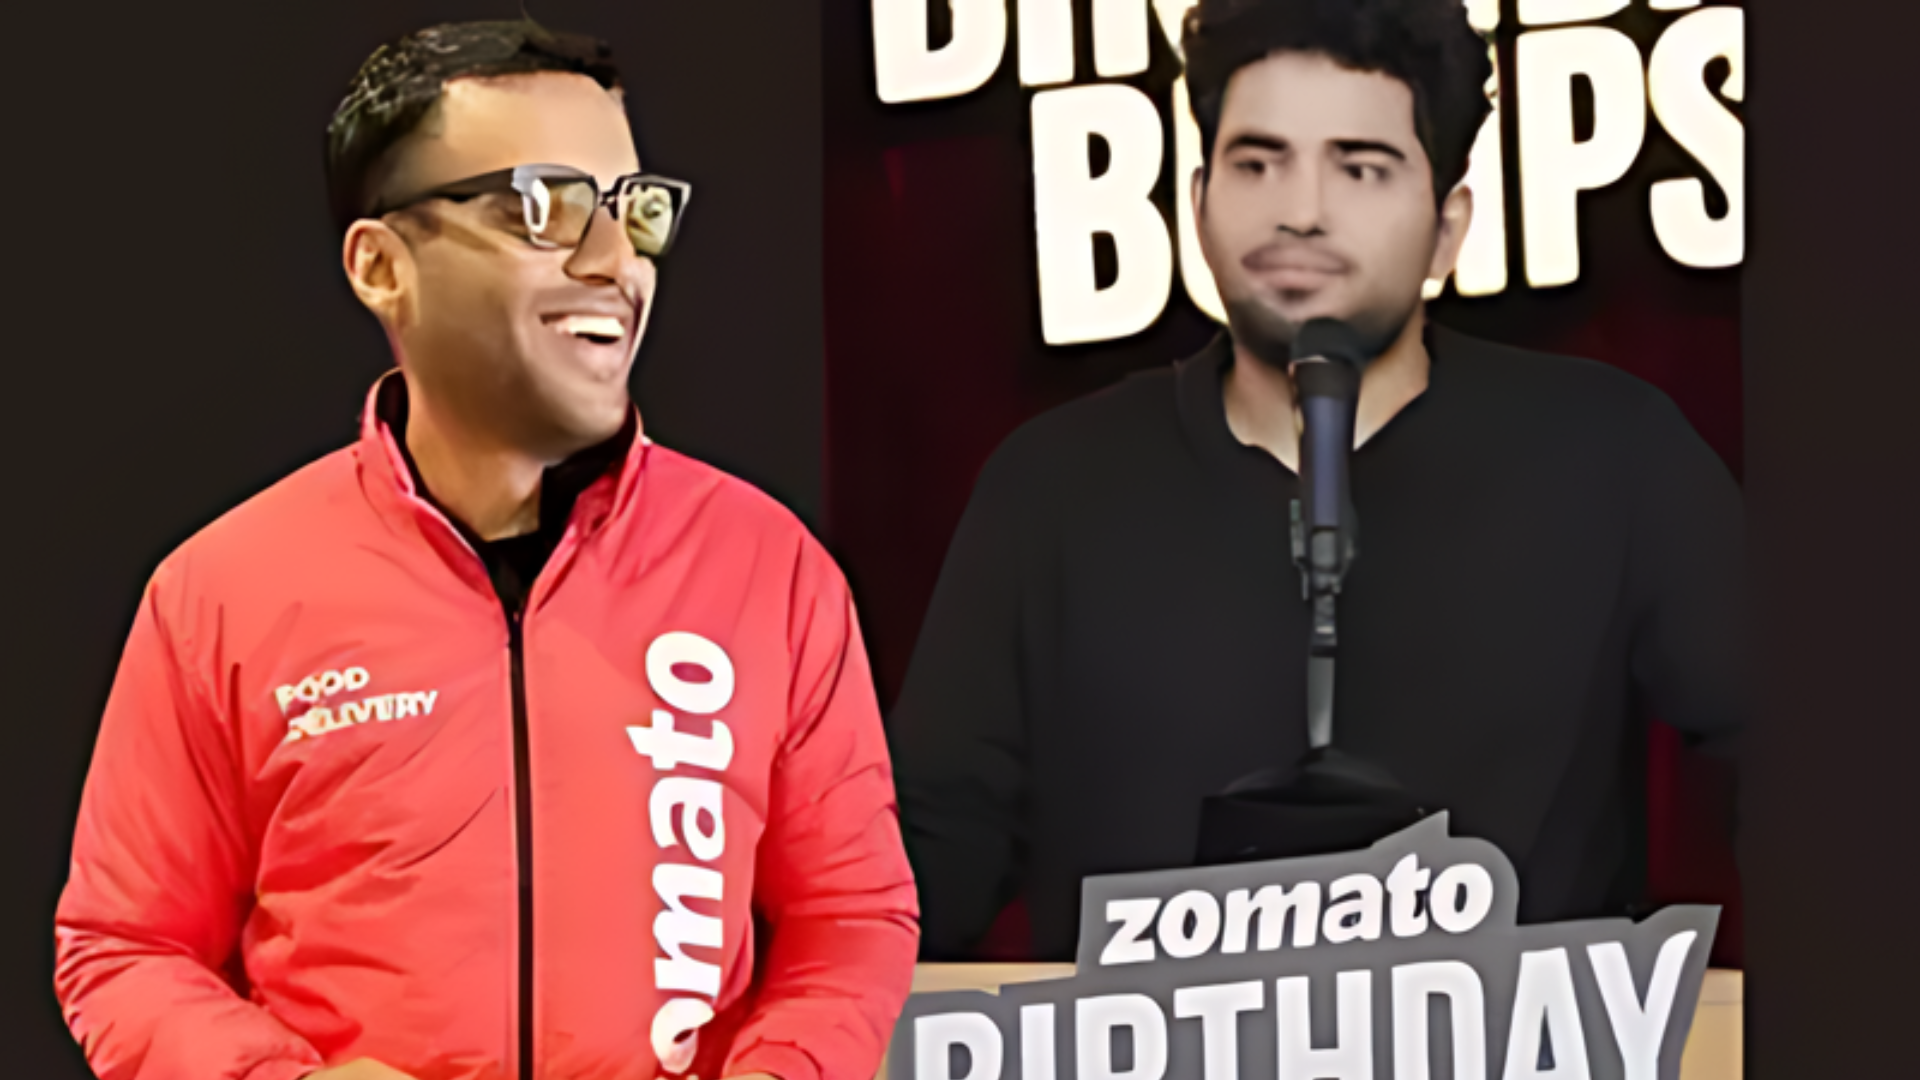 Zomato Celebrates 16th Birthday with Comedy Roast Amidst Criticism Over Fees